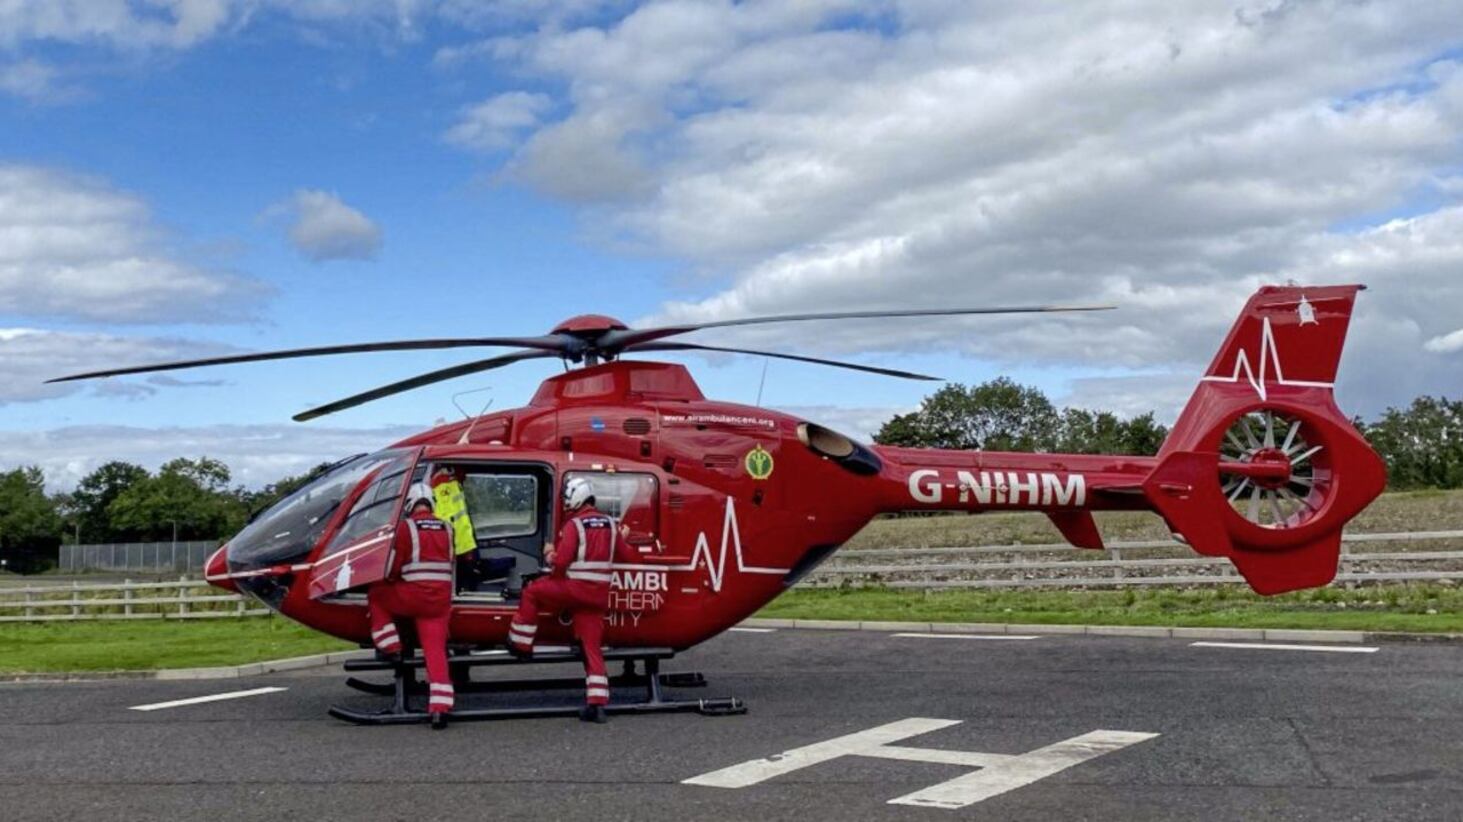 Air Ambulance says call out rates for first quarter of 2021 have been the busiest period since operations began 